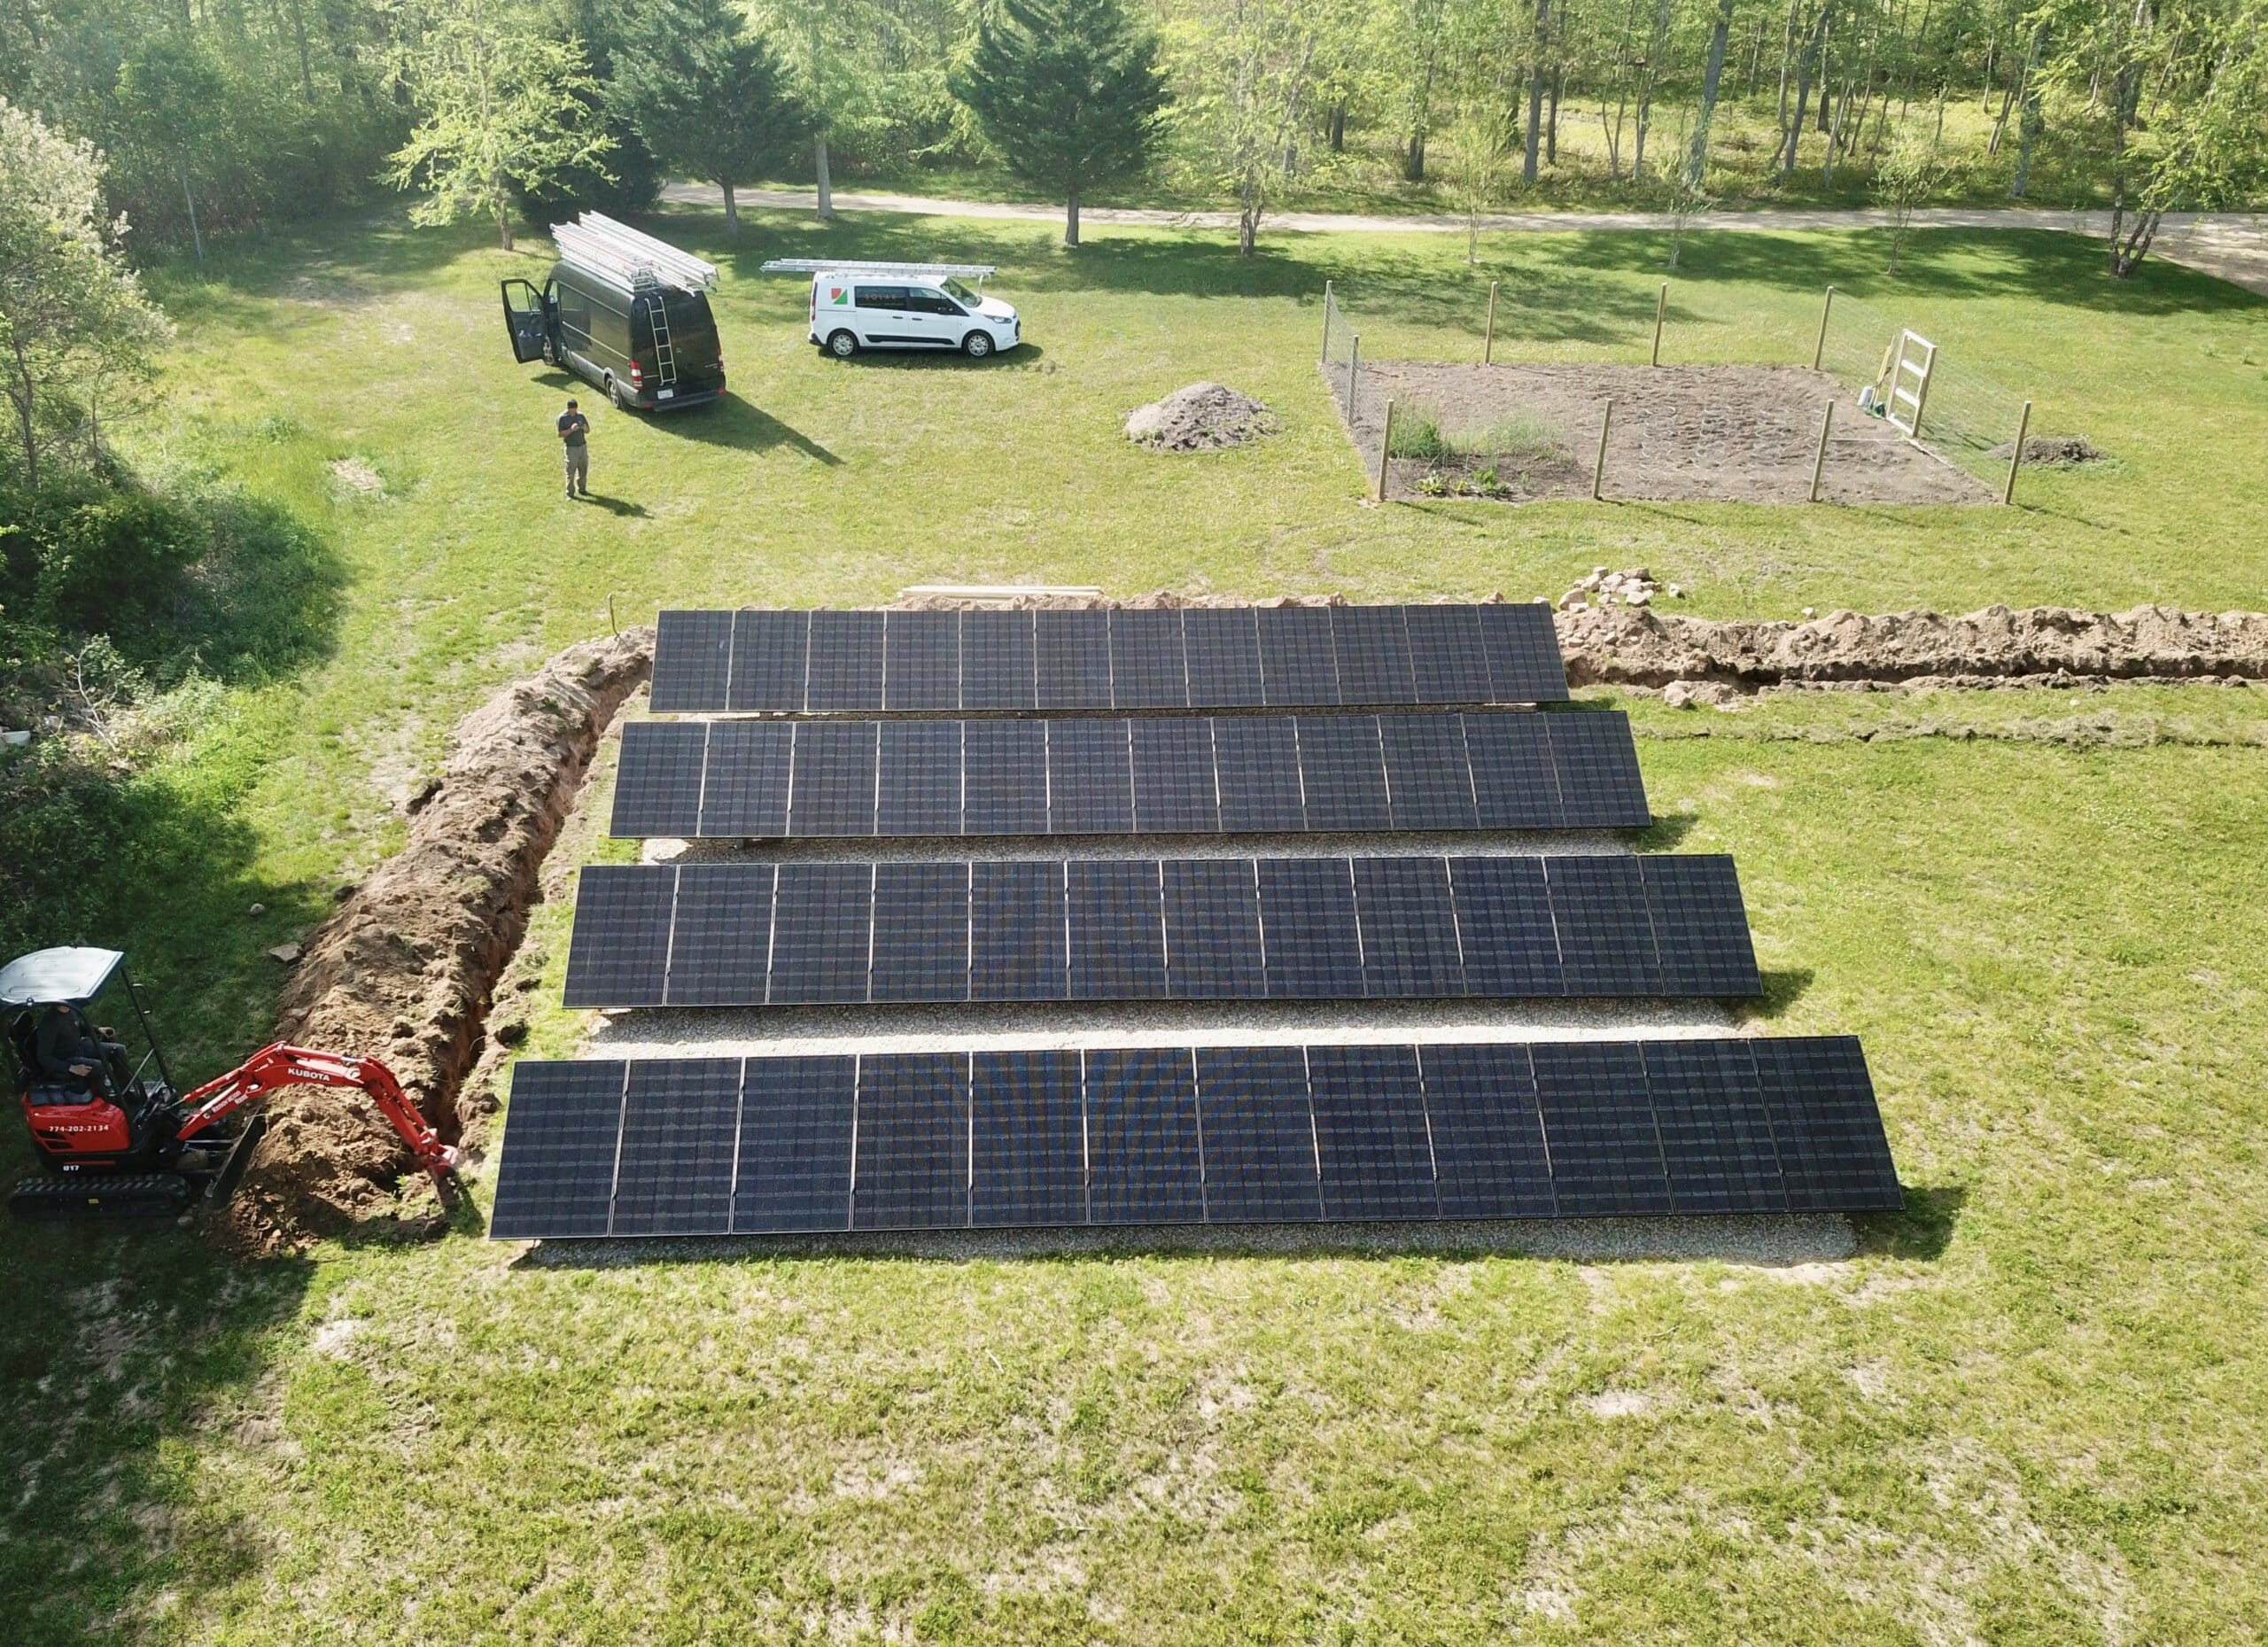 field with solar panel array